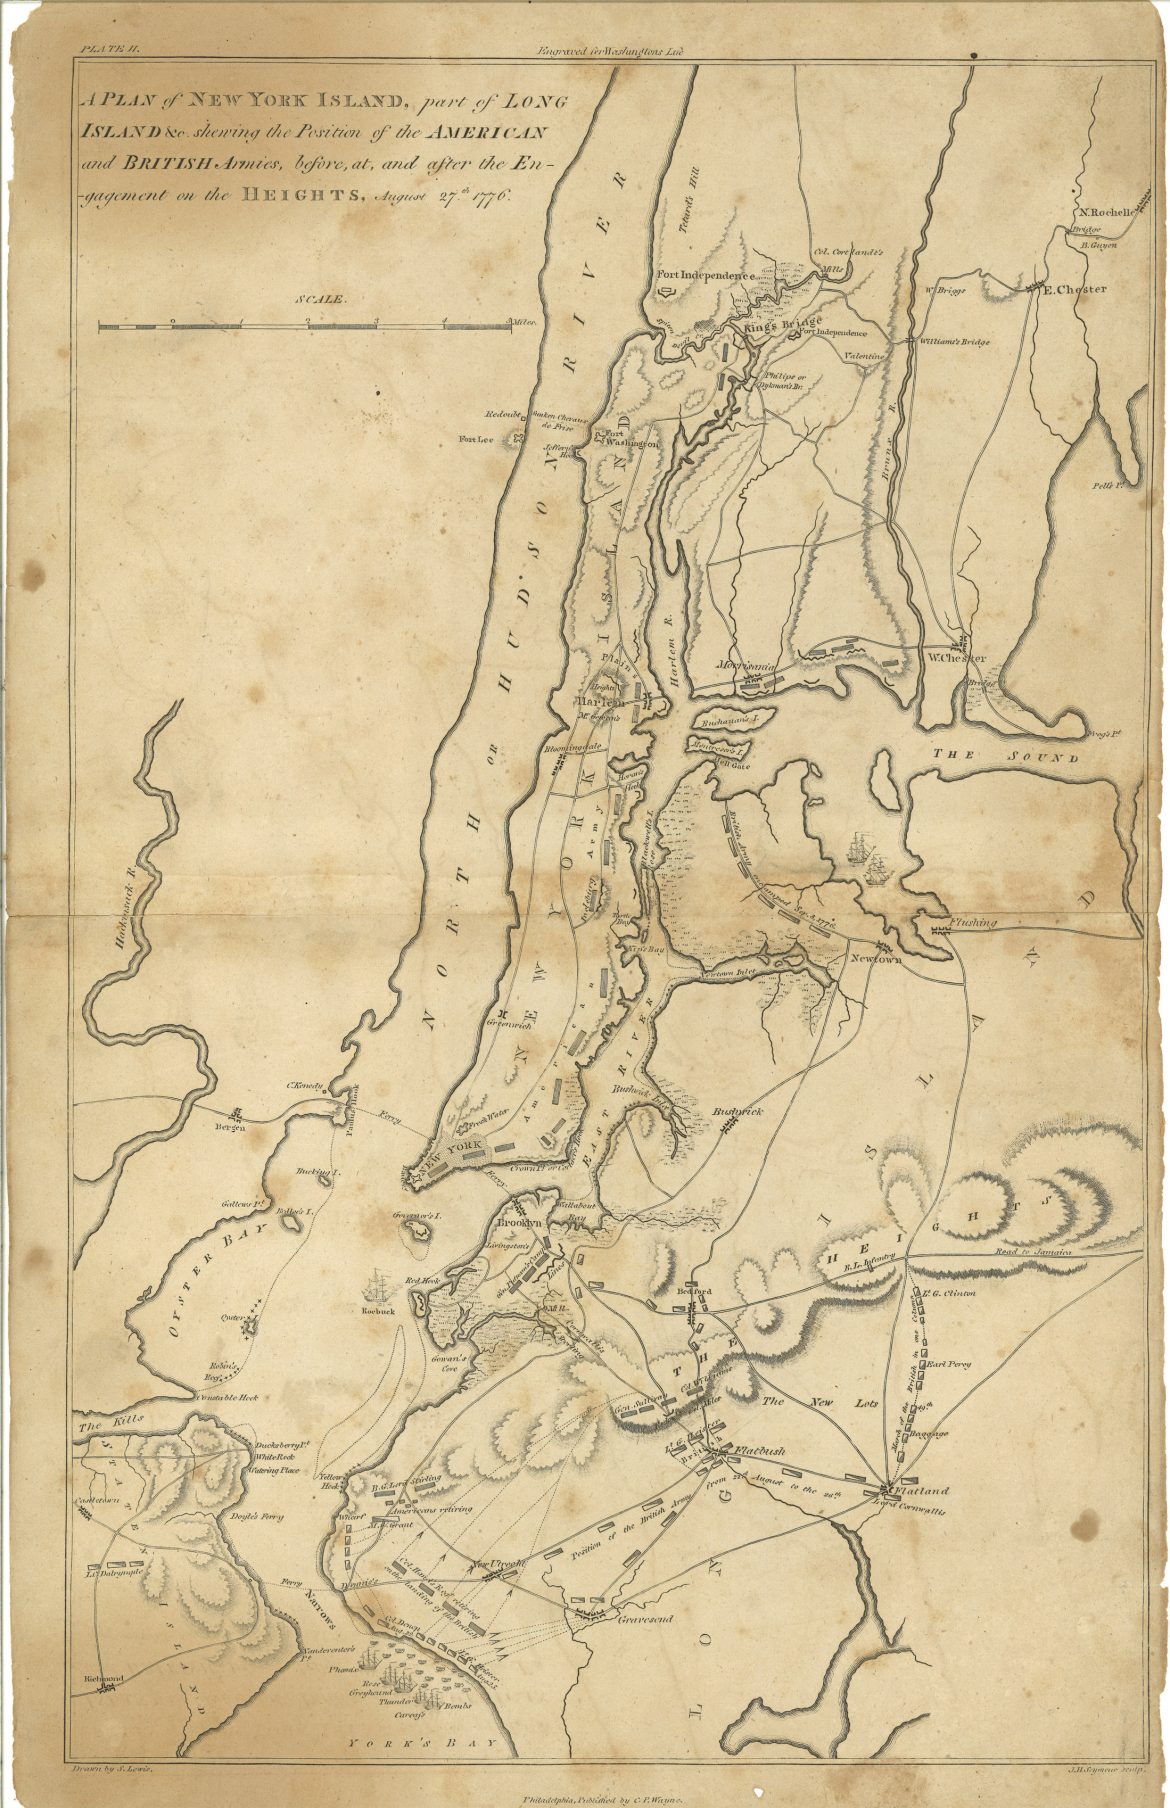 1776 Map of NY illustrated 1807 - Journal of the American Revolution